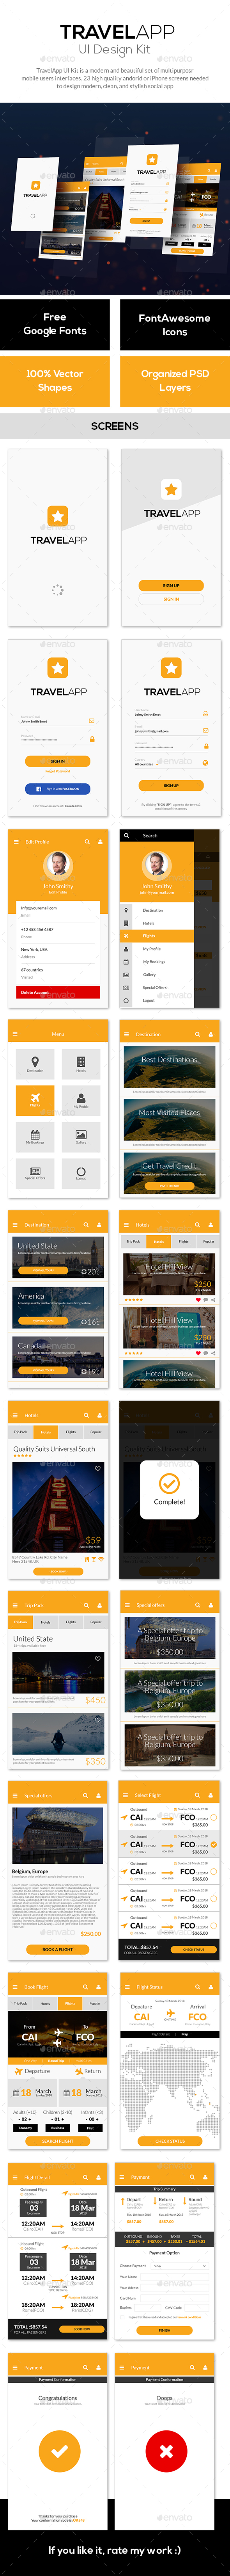 Travel, Tour, Hotel Booking Mobile App Mobile UI - Star Travel